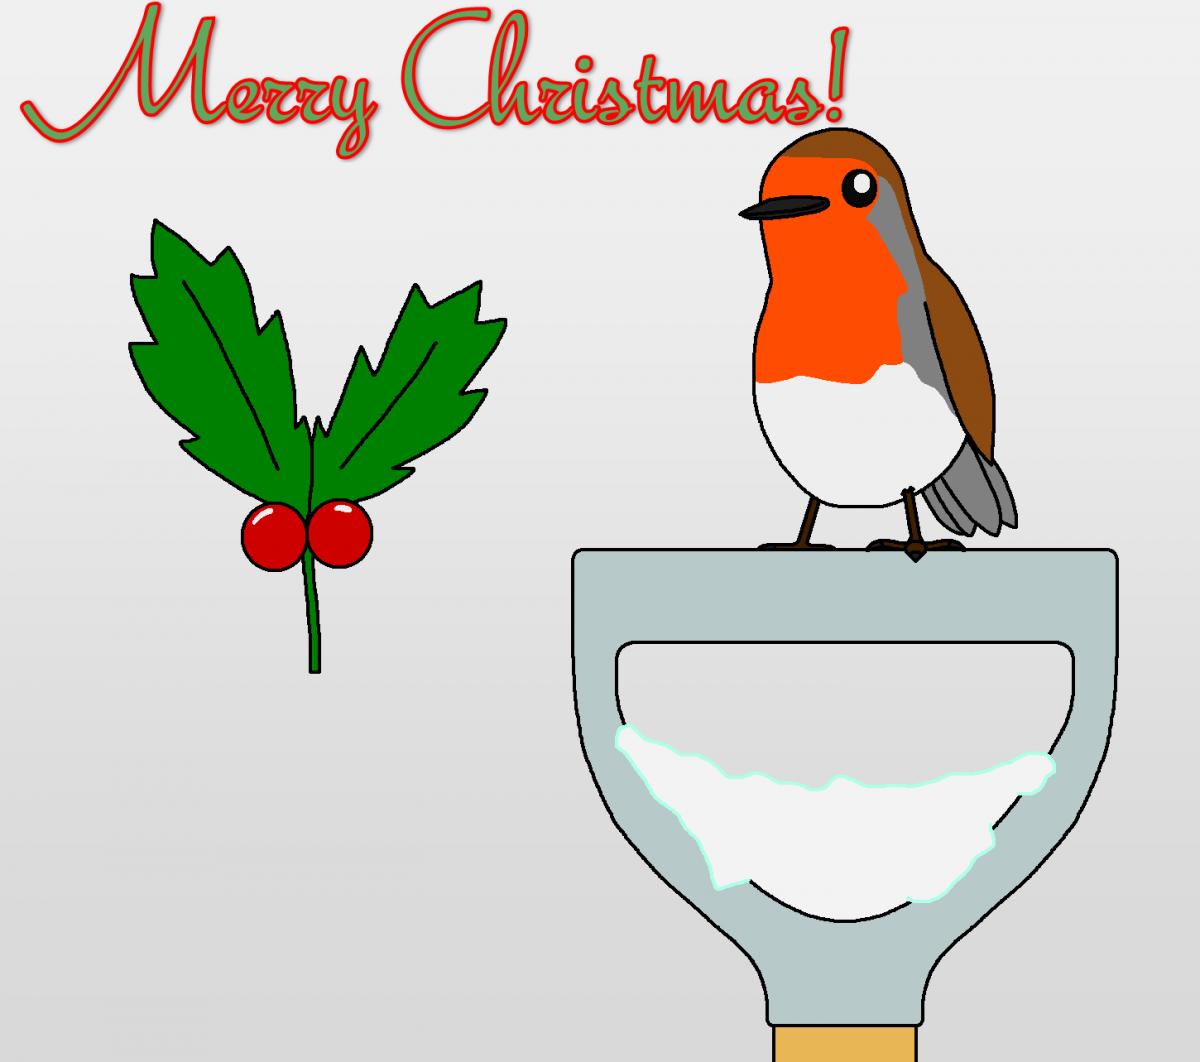 merry_christmas__card_cover_by_theblooman_dbwpthl.jpg